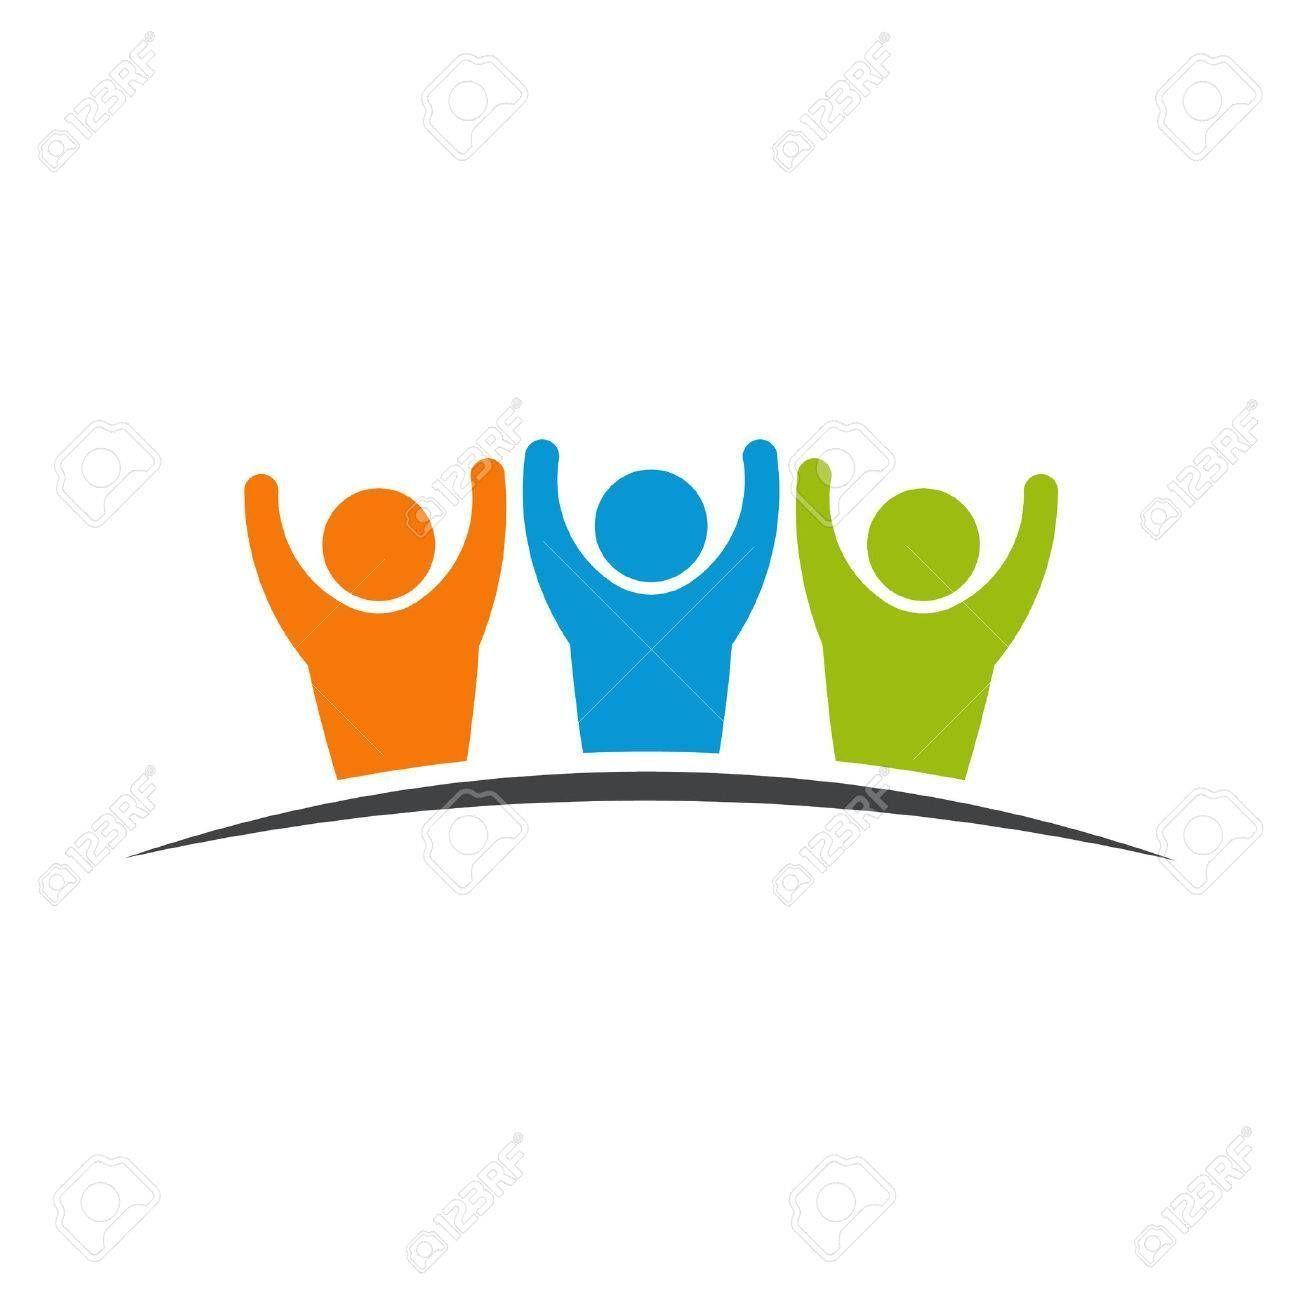 What Are 3 People as a Logo - Teamwork group of 3 people friendshipRF Business Logos